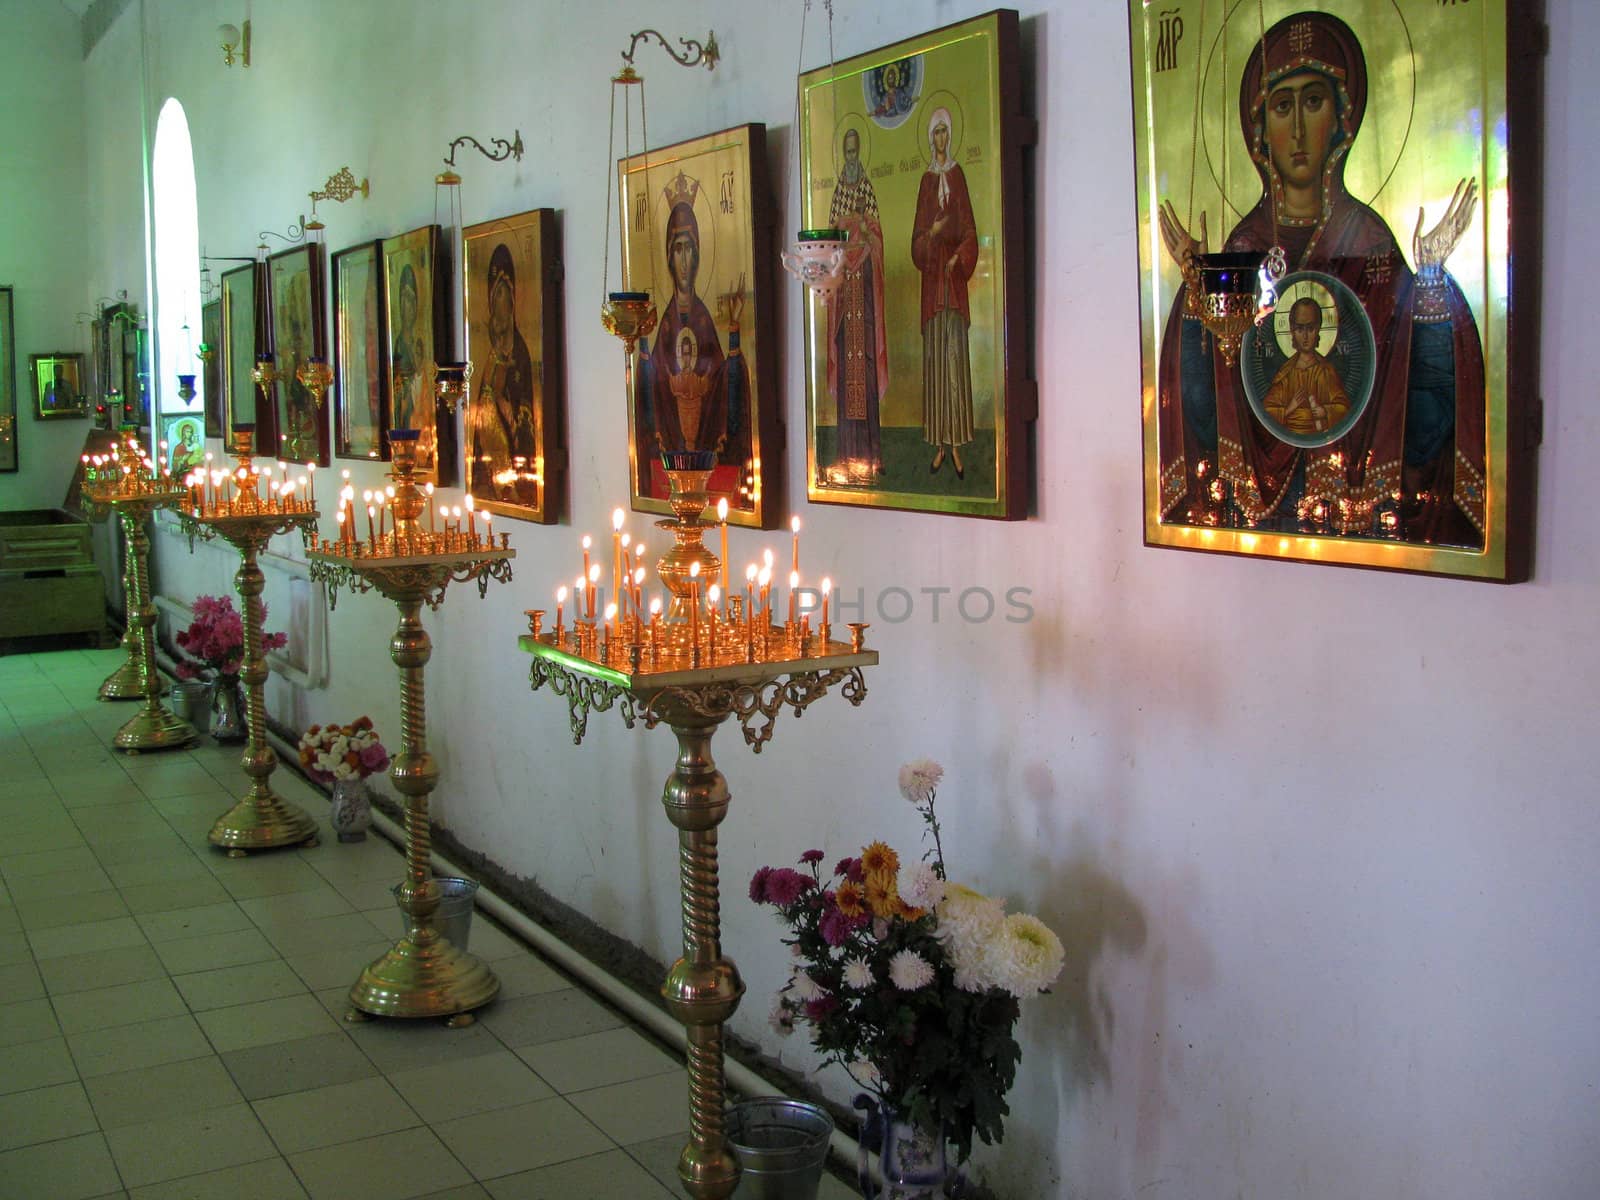 Temple, icons, Gosh mother, church; candles, image by Viktoha